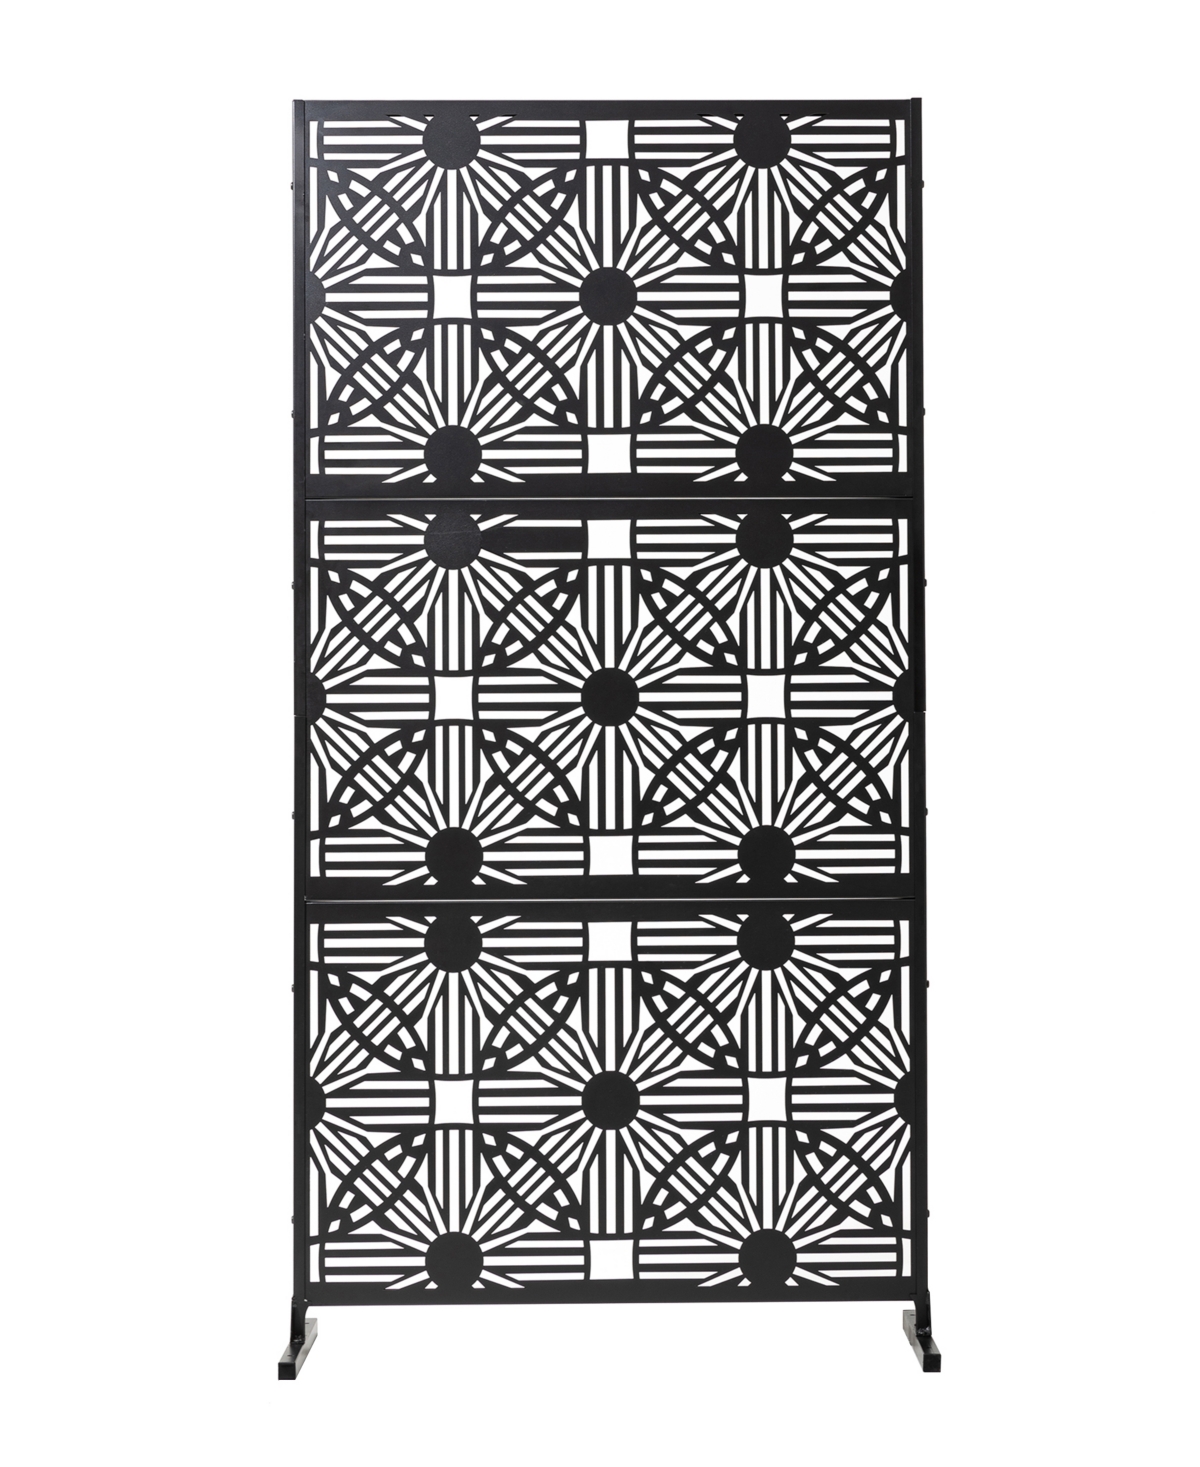 Black Galvanized Floral Privacy Panel Room Divider with Riser Feet - Black